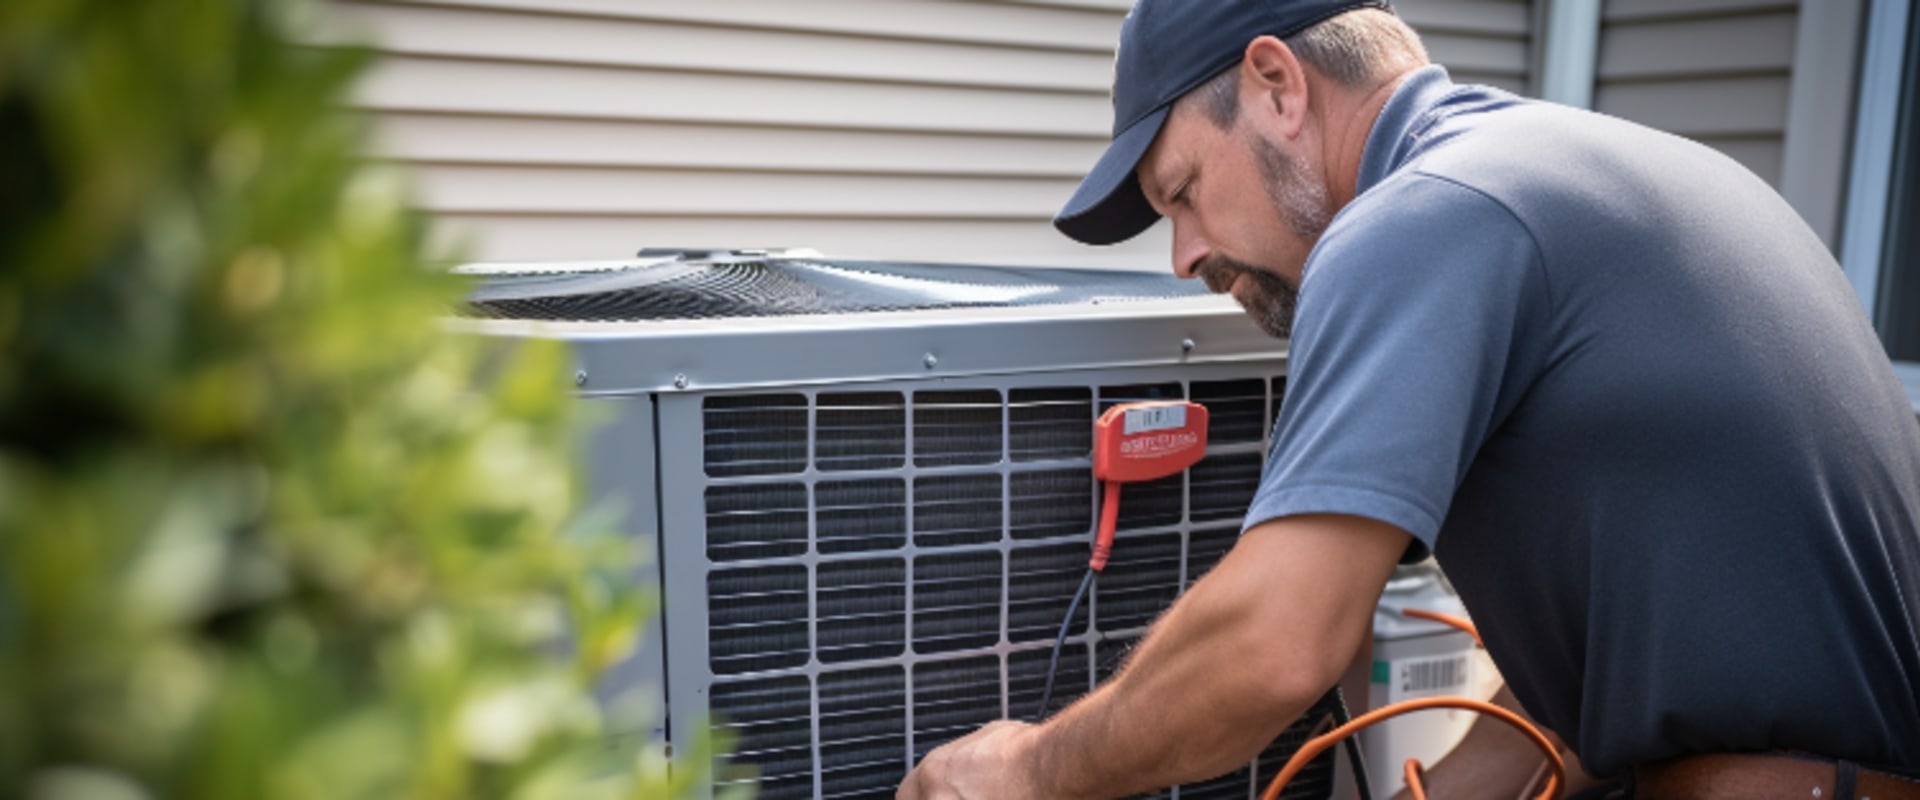 Upgrade Now With AC Replacement Services in Palmetto Bay FL